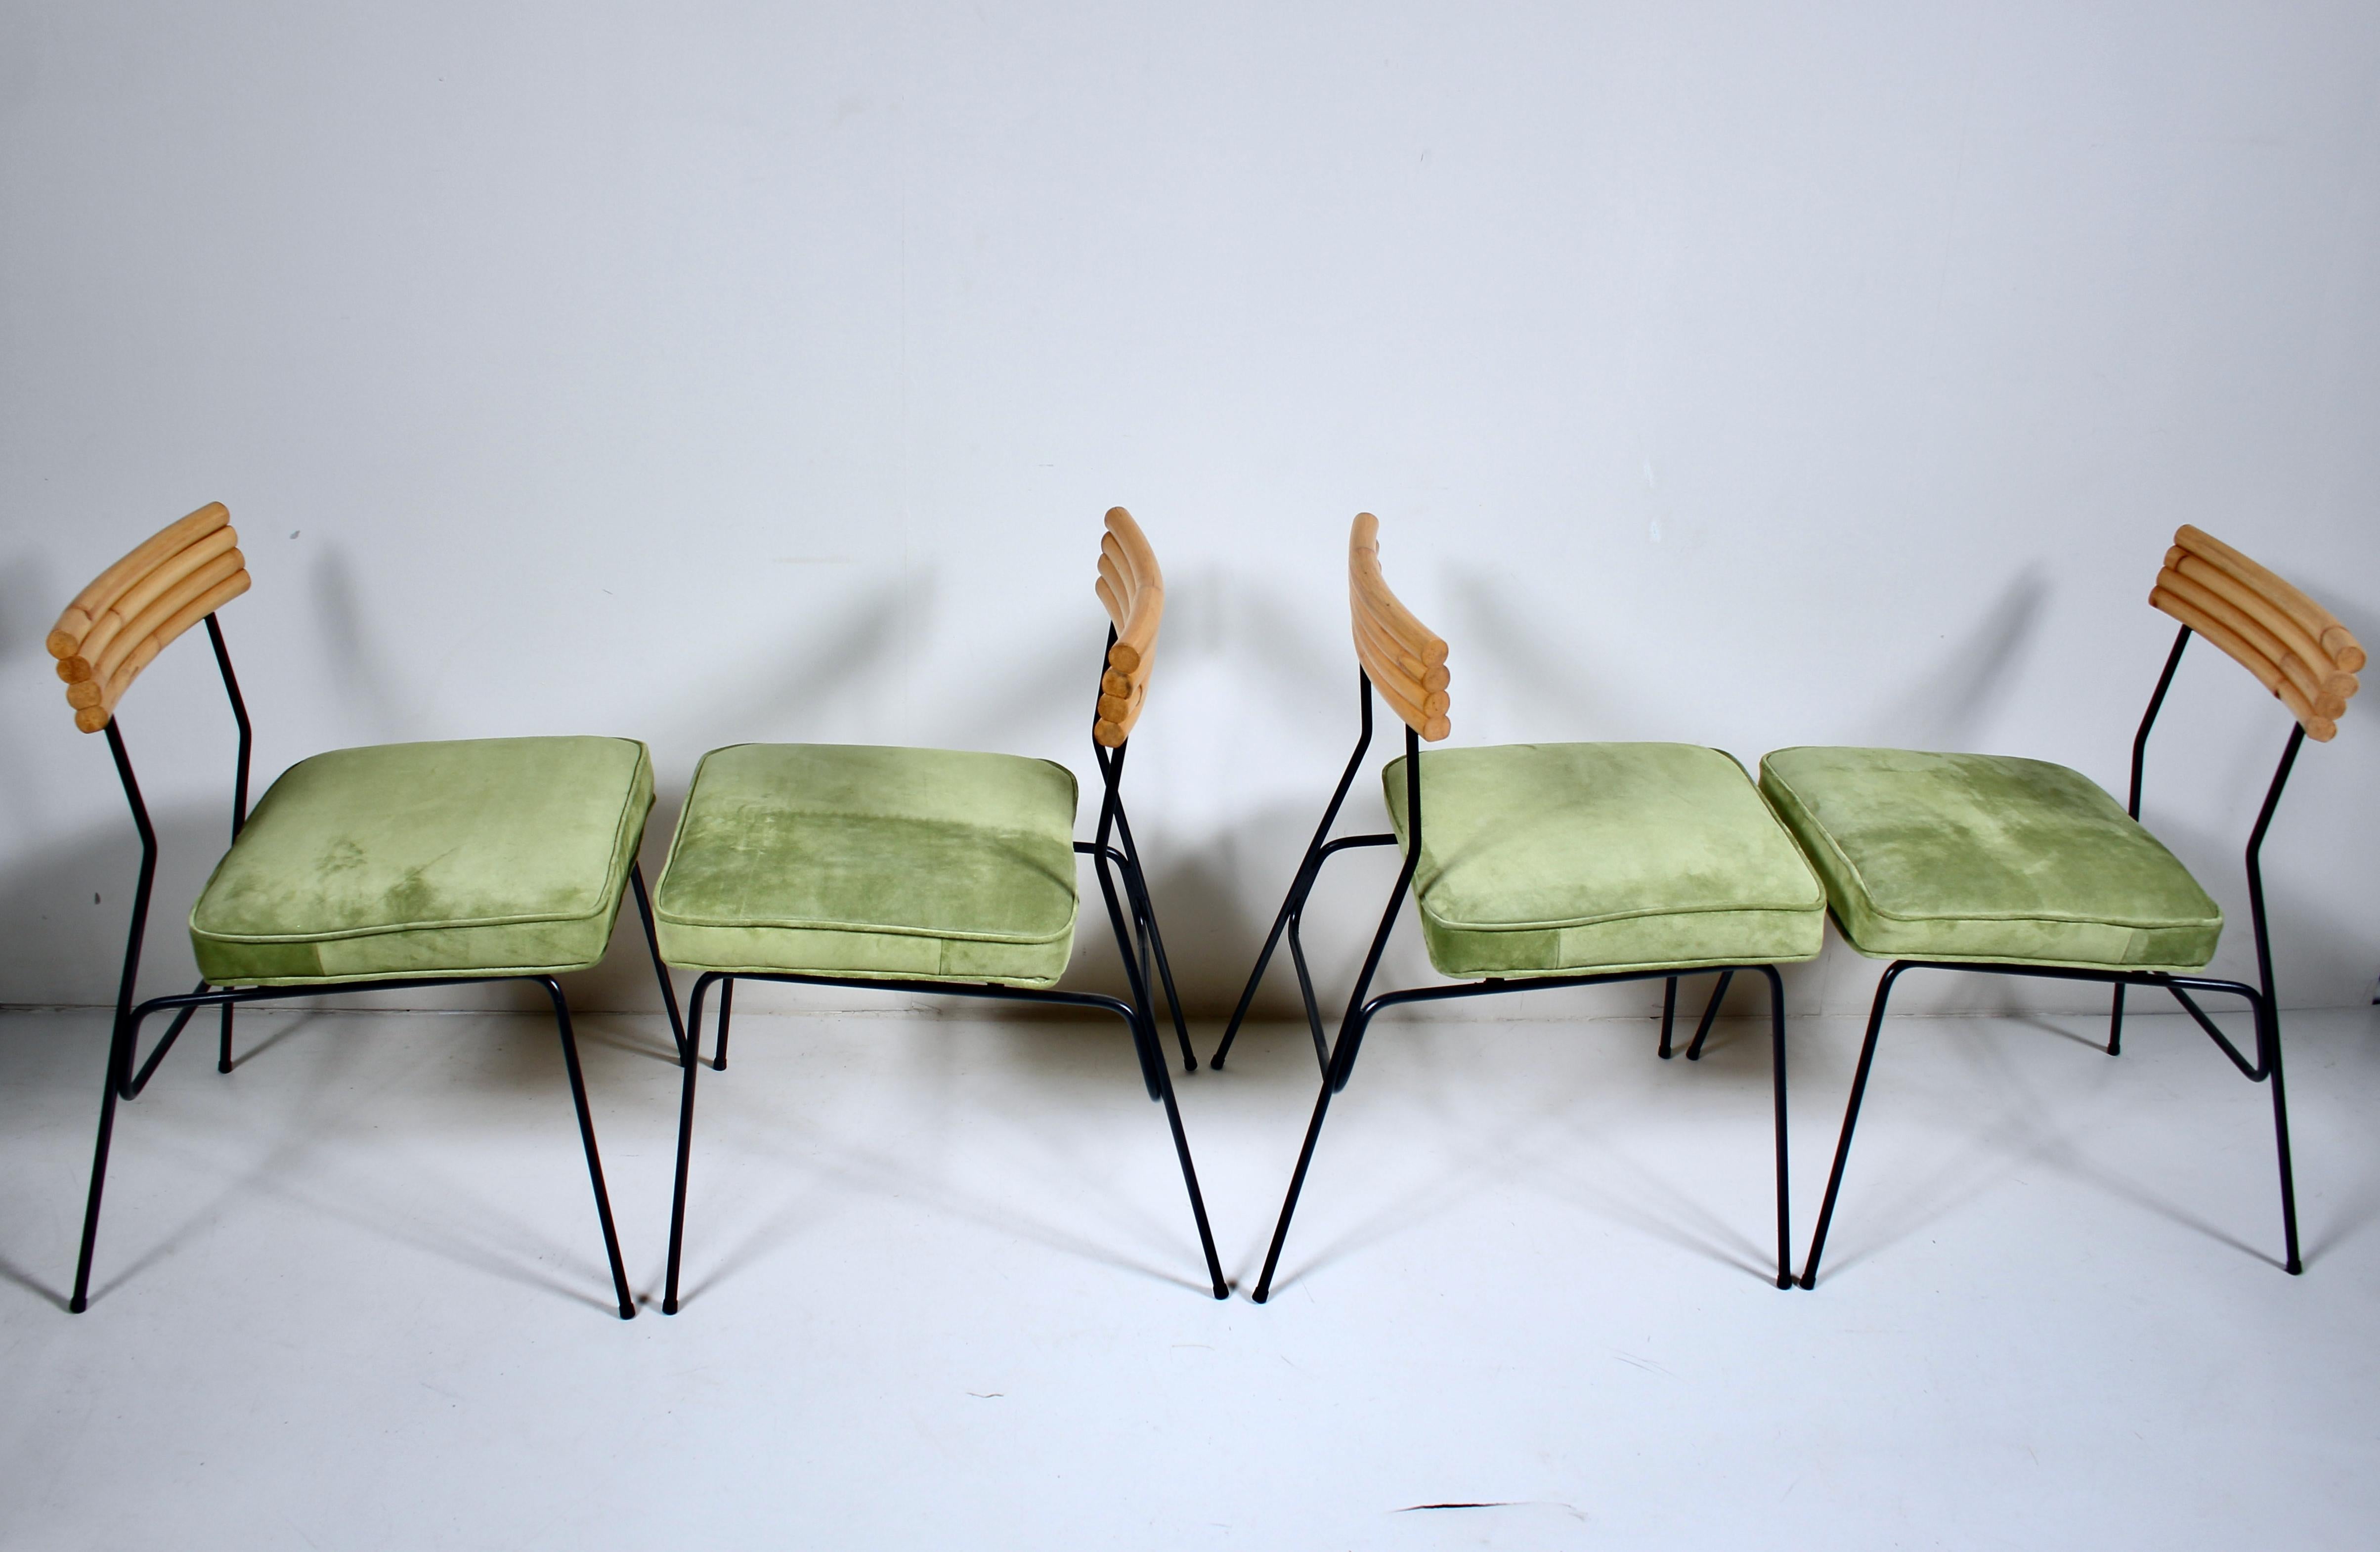 Set of 4 Herb & Shirley Ritts Iron, Bamboo & Suede Dining Side Chairs, 1950s For Sale 13